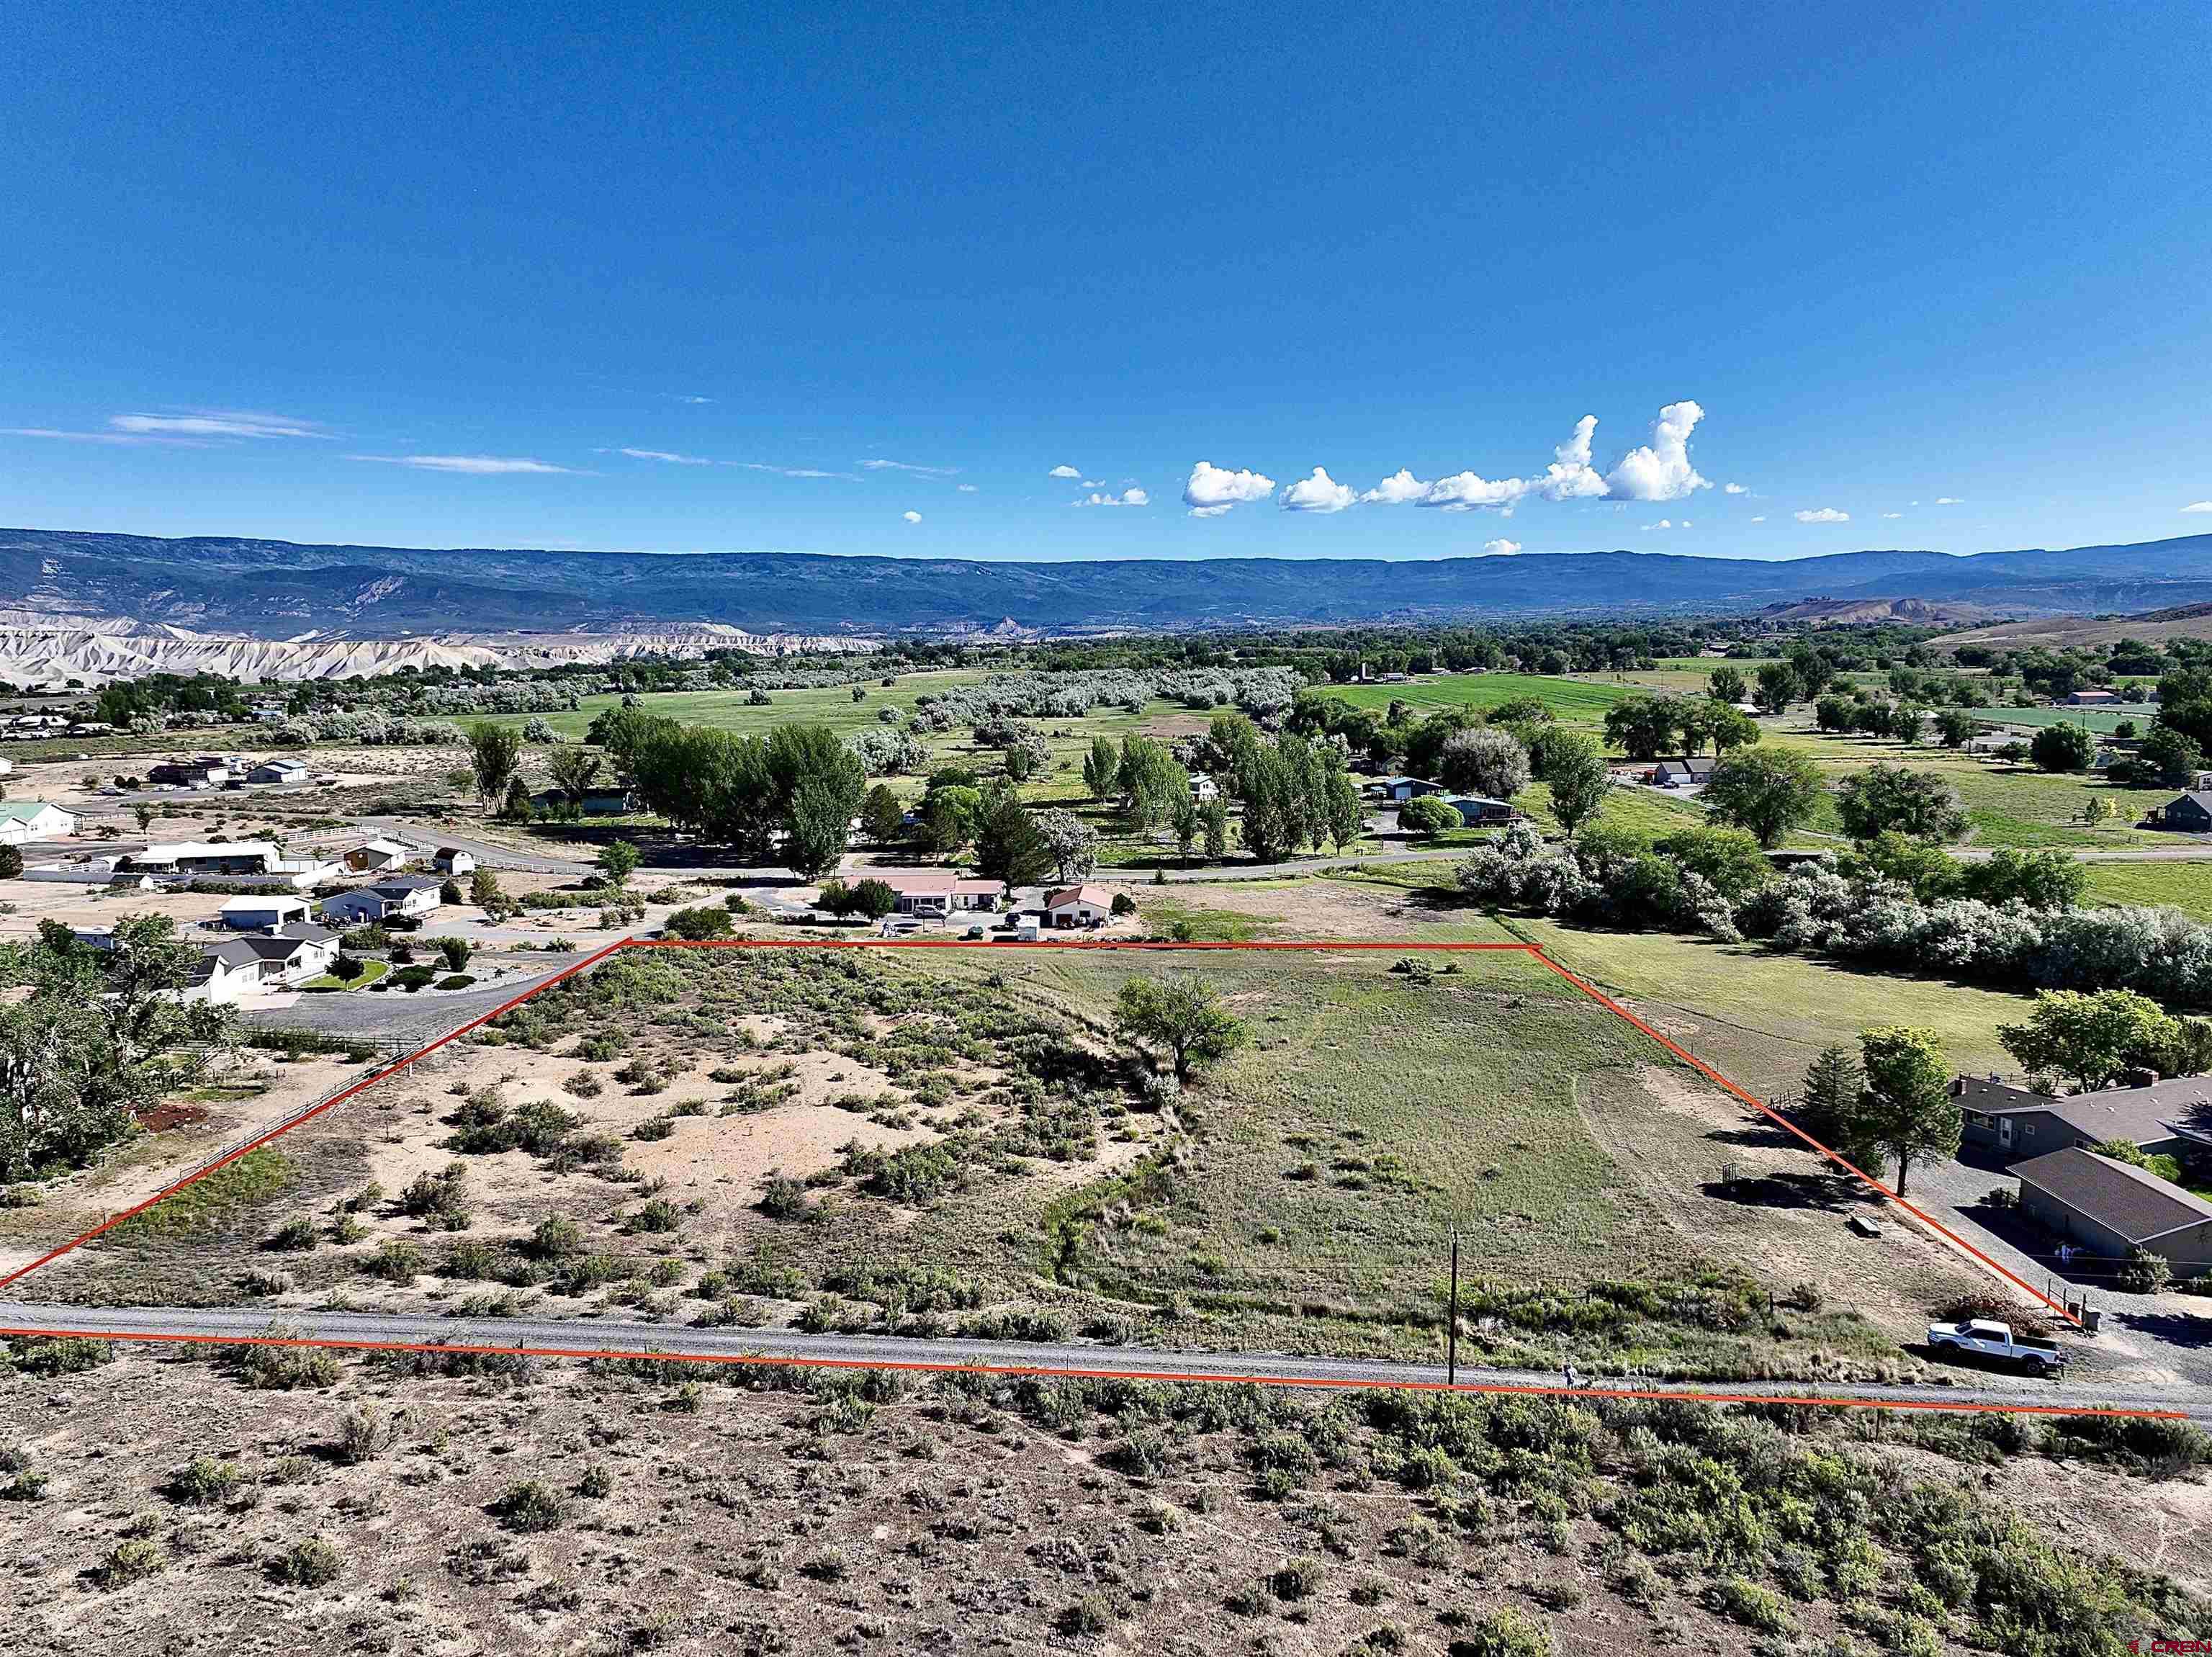 Small acreage in Delta County is hard to find and even tougher to find a property with irrigation water. Come build your home on this nice piece of land. This 4.91 acre lot is accessed on a private road. There is a great building site above the ditch on the western high side of the property that has some mountain views to the south east and north. The native grass and shrubs are still covering this lot and it is virtually untouched. Shape this into the property you would like. There is one Orchard City Domestic Water tap included. Survey has been done and plat is included in documents.   With the 1 share of Orchard City Irrigation Ditch and 3 shares of Butte Ditch water you can grow some pasture and keep the yard nice and green. Ditch runs right through the middle of the property and with a pump you could water your lawn or grow some pasture above the ditch as well. With no covenants build a shop for your toys or a barn for your livestock. Grow some fruit trees or a sweet garden. The surrounding properties are small acreage properties.   The Grand Mesa and all that it has to offer for outdoor recreation is only a 20 minute drive away. Delta is only 15 minutes away and has all your shopping, health care and necessities.